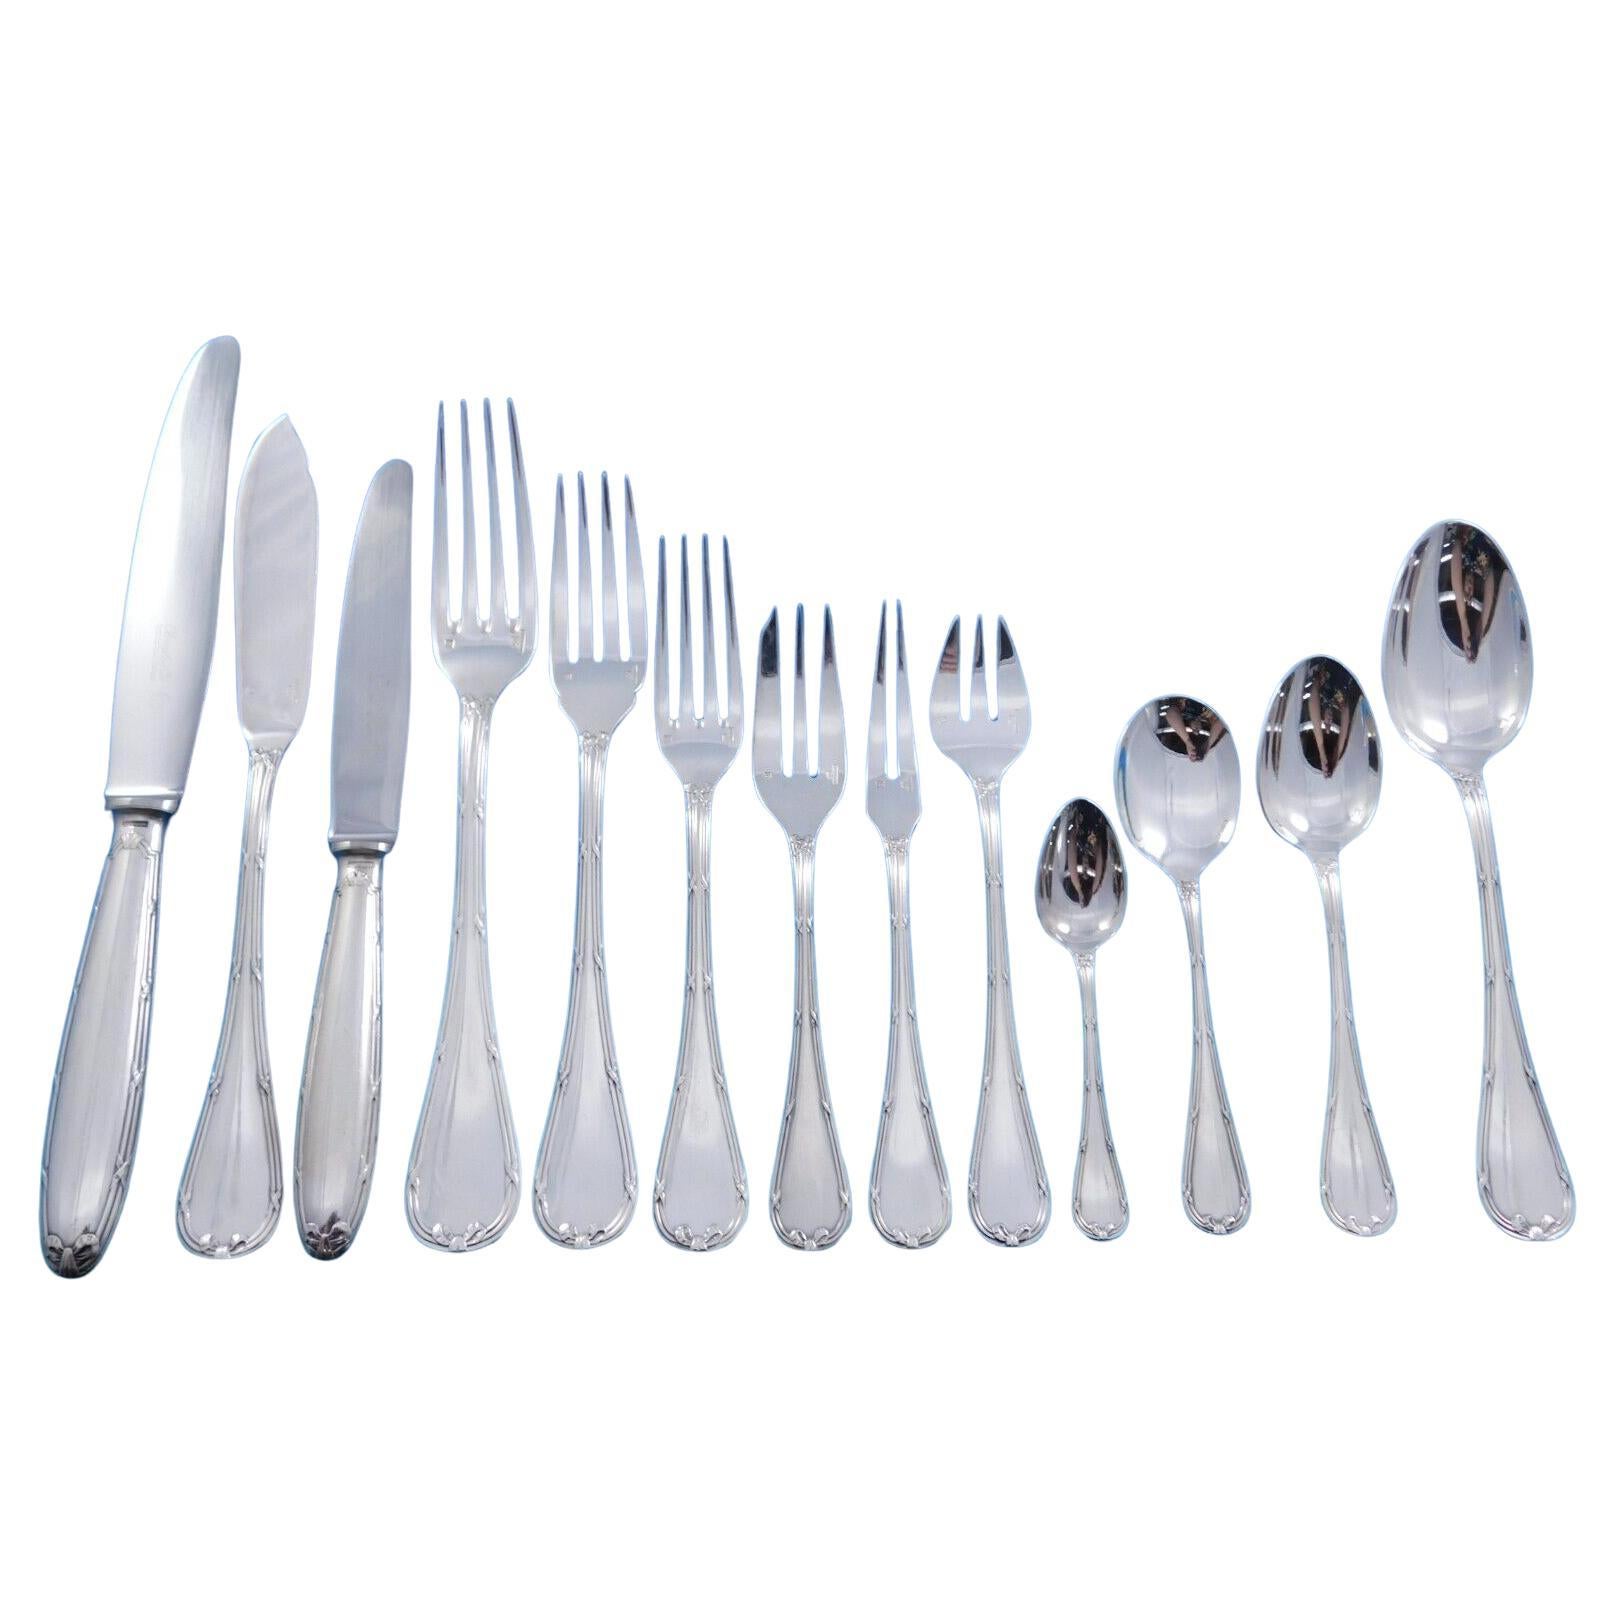 What is the best stainless steel flatware to buy?